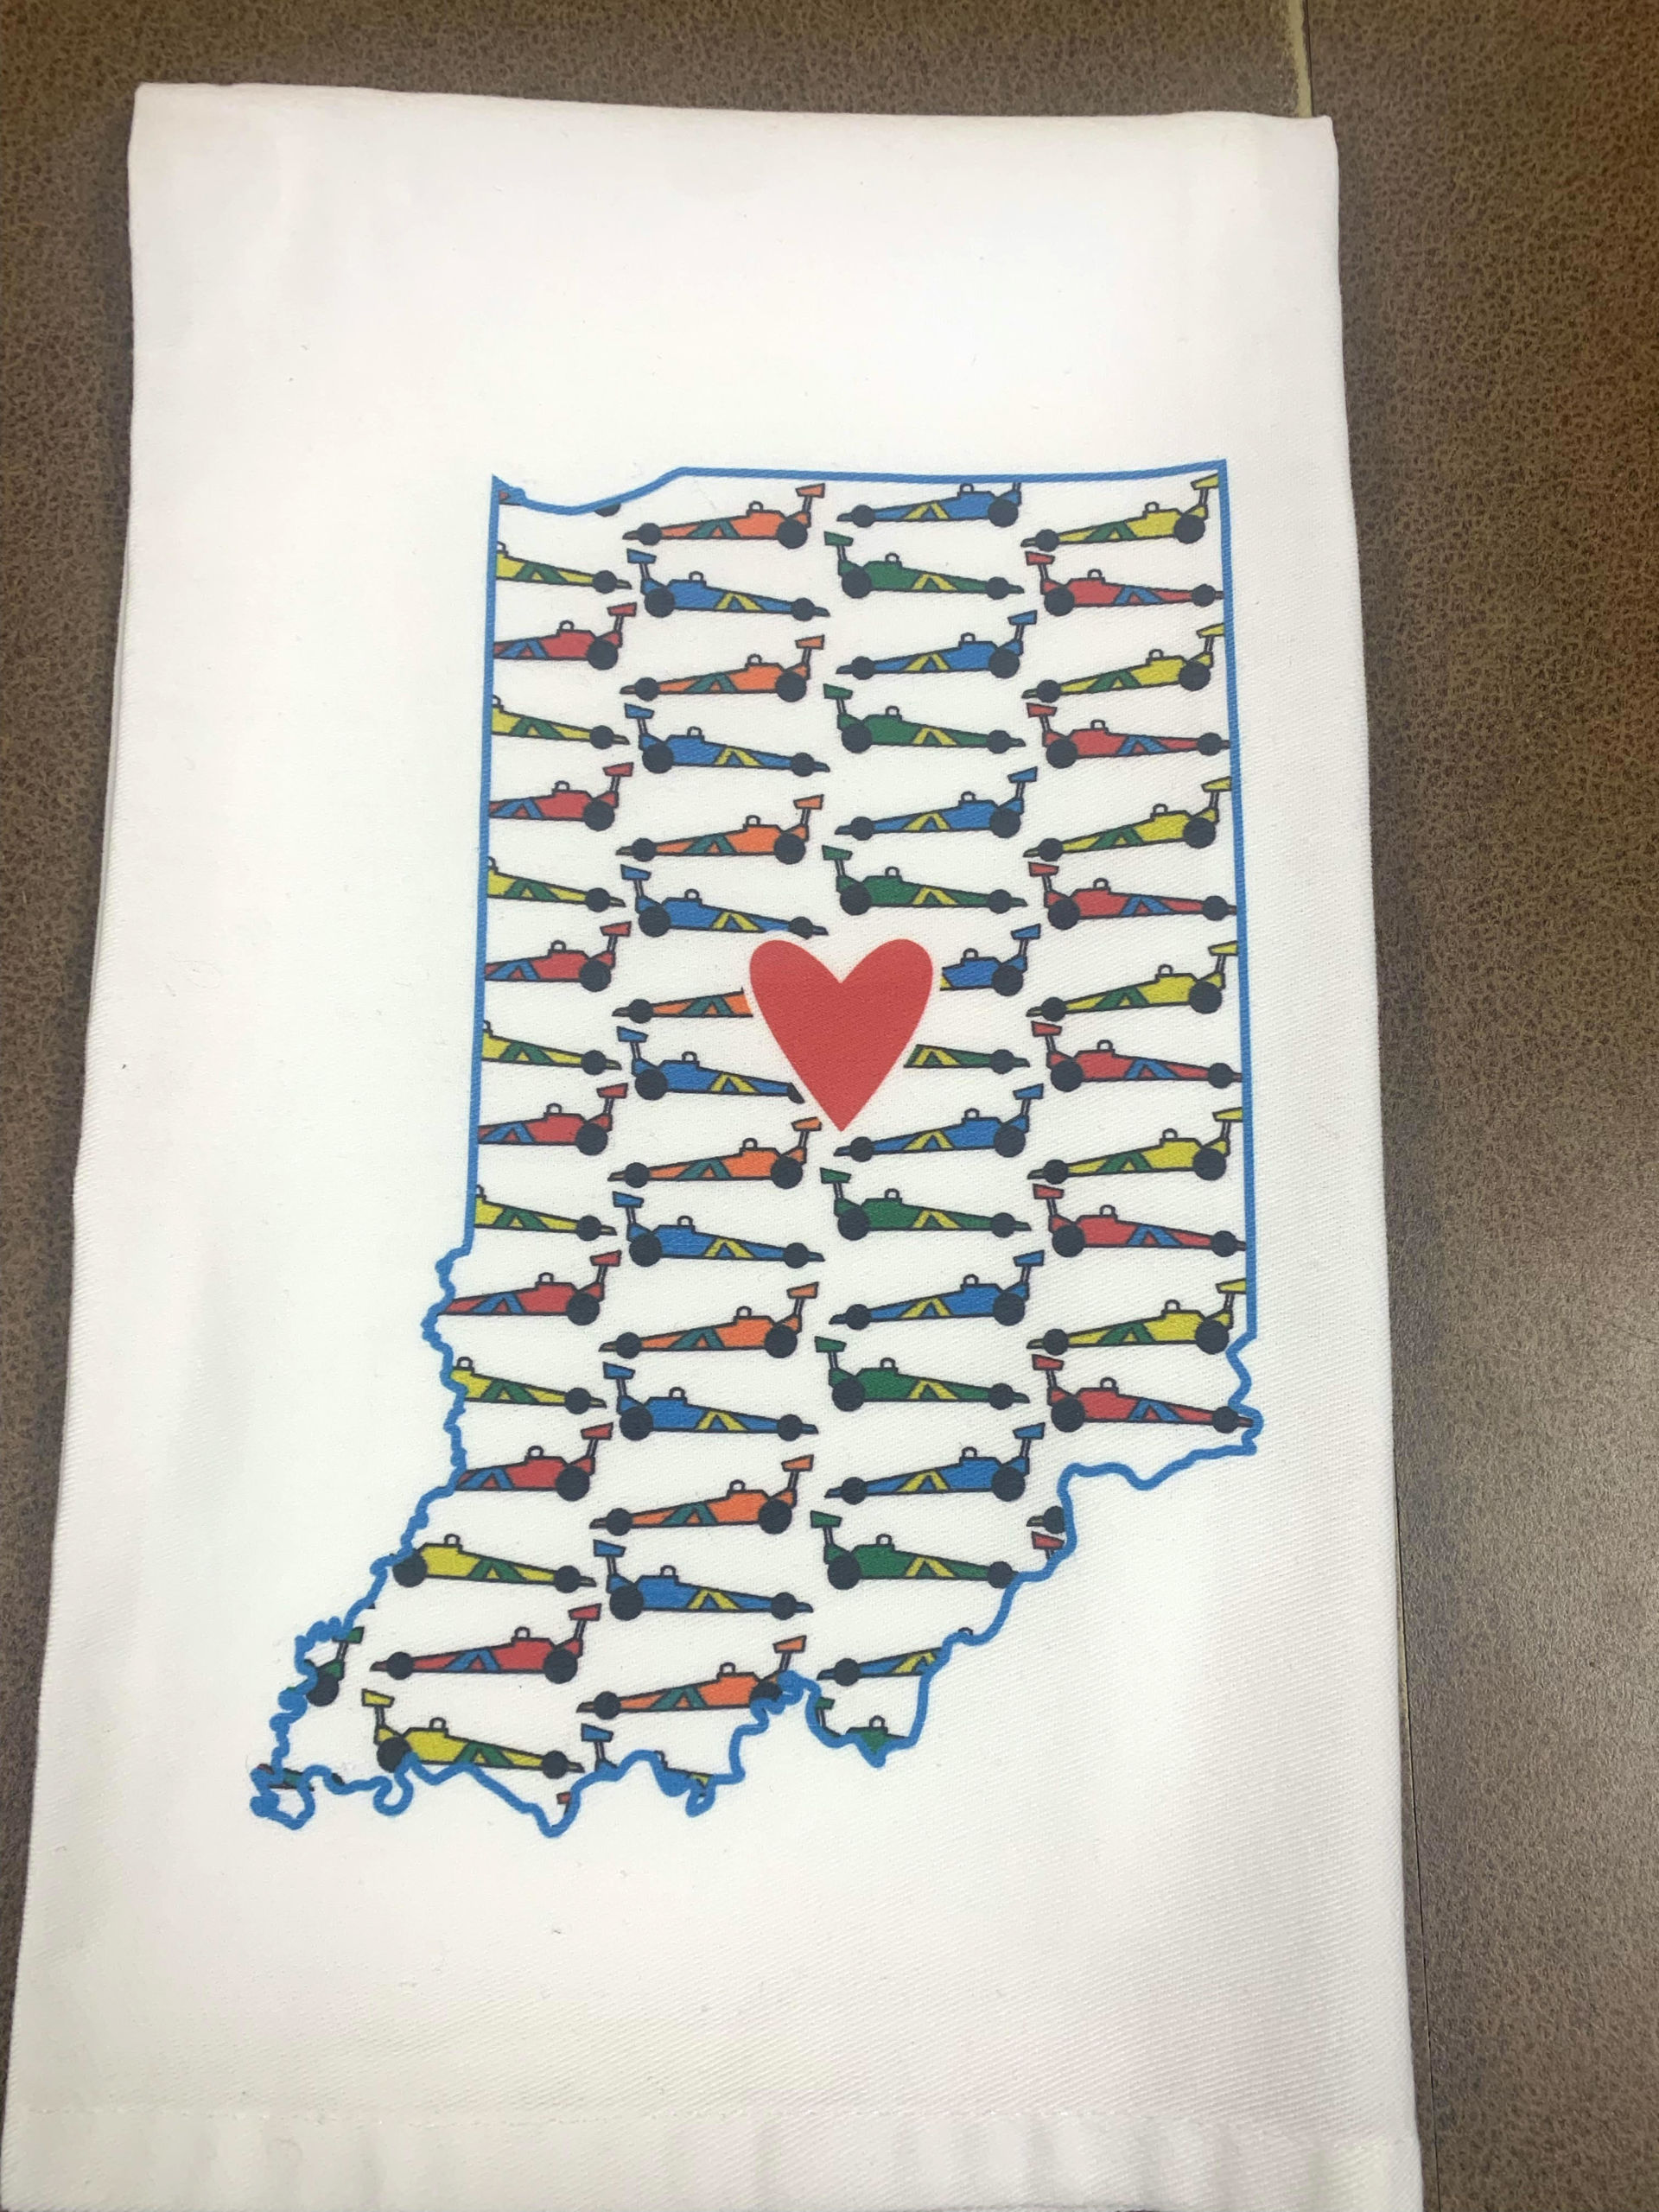 A dish towel printed with race cars